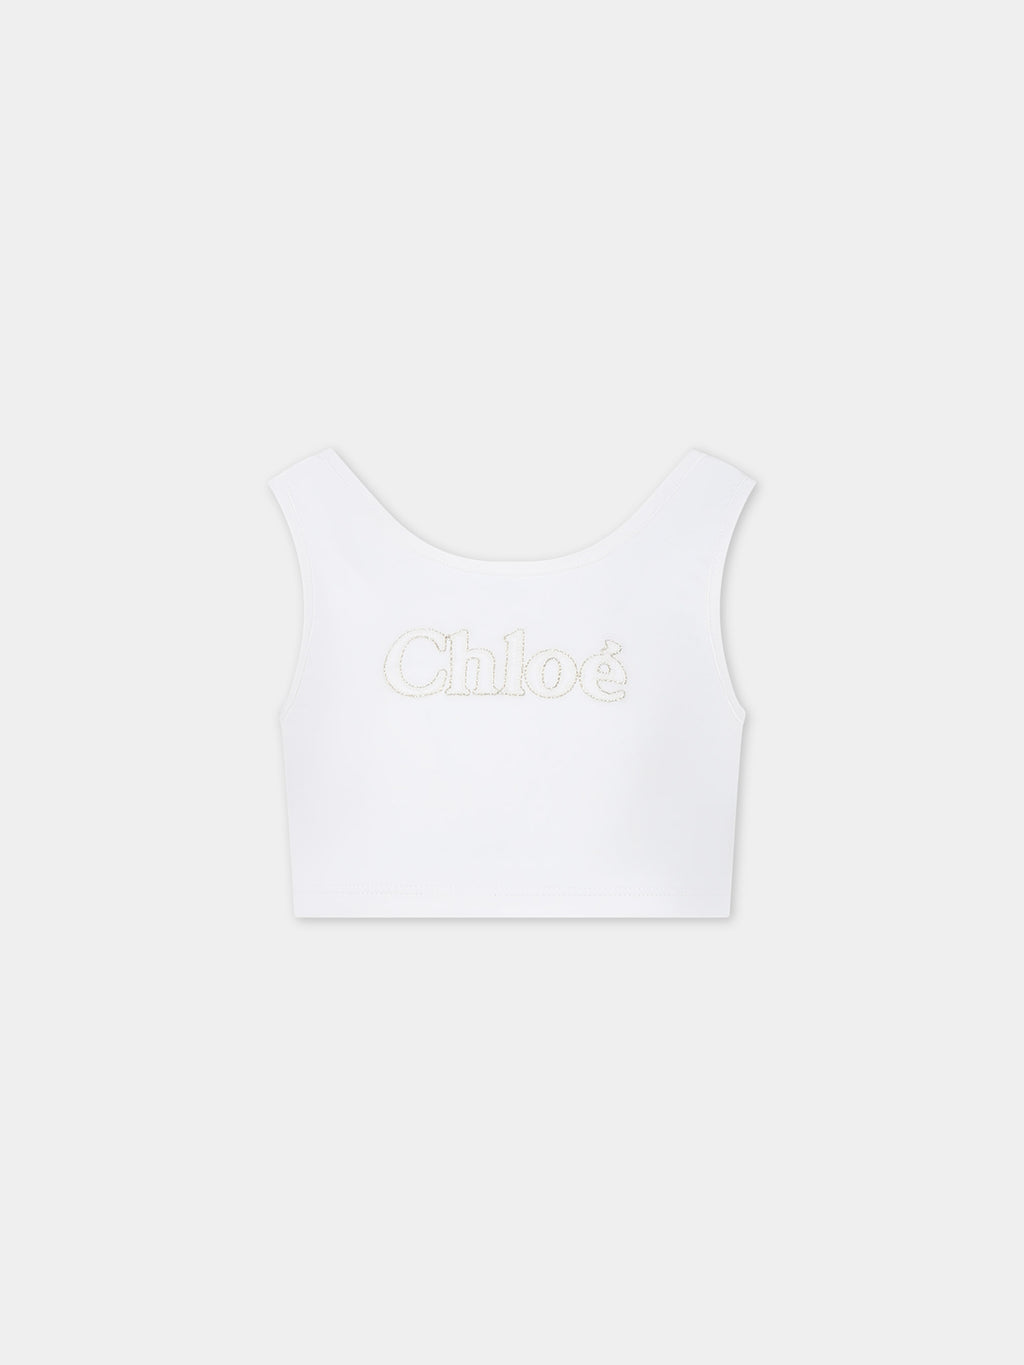 White cotton top for girl with embroidered logo